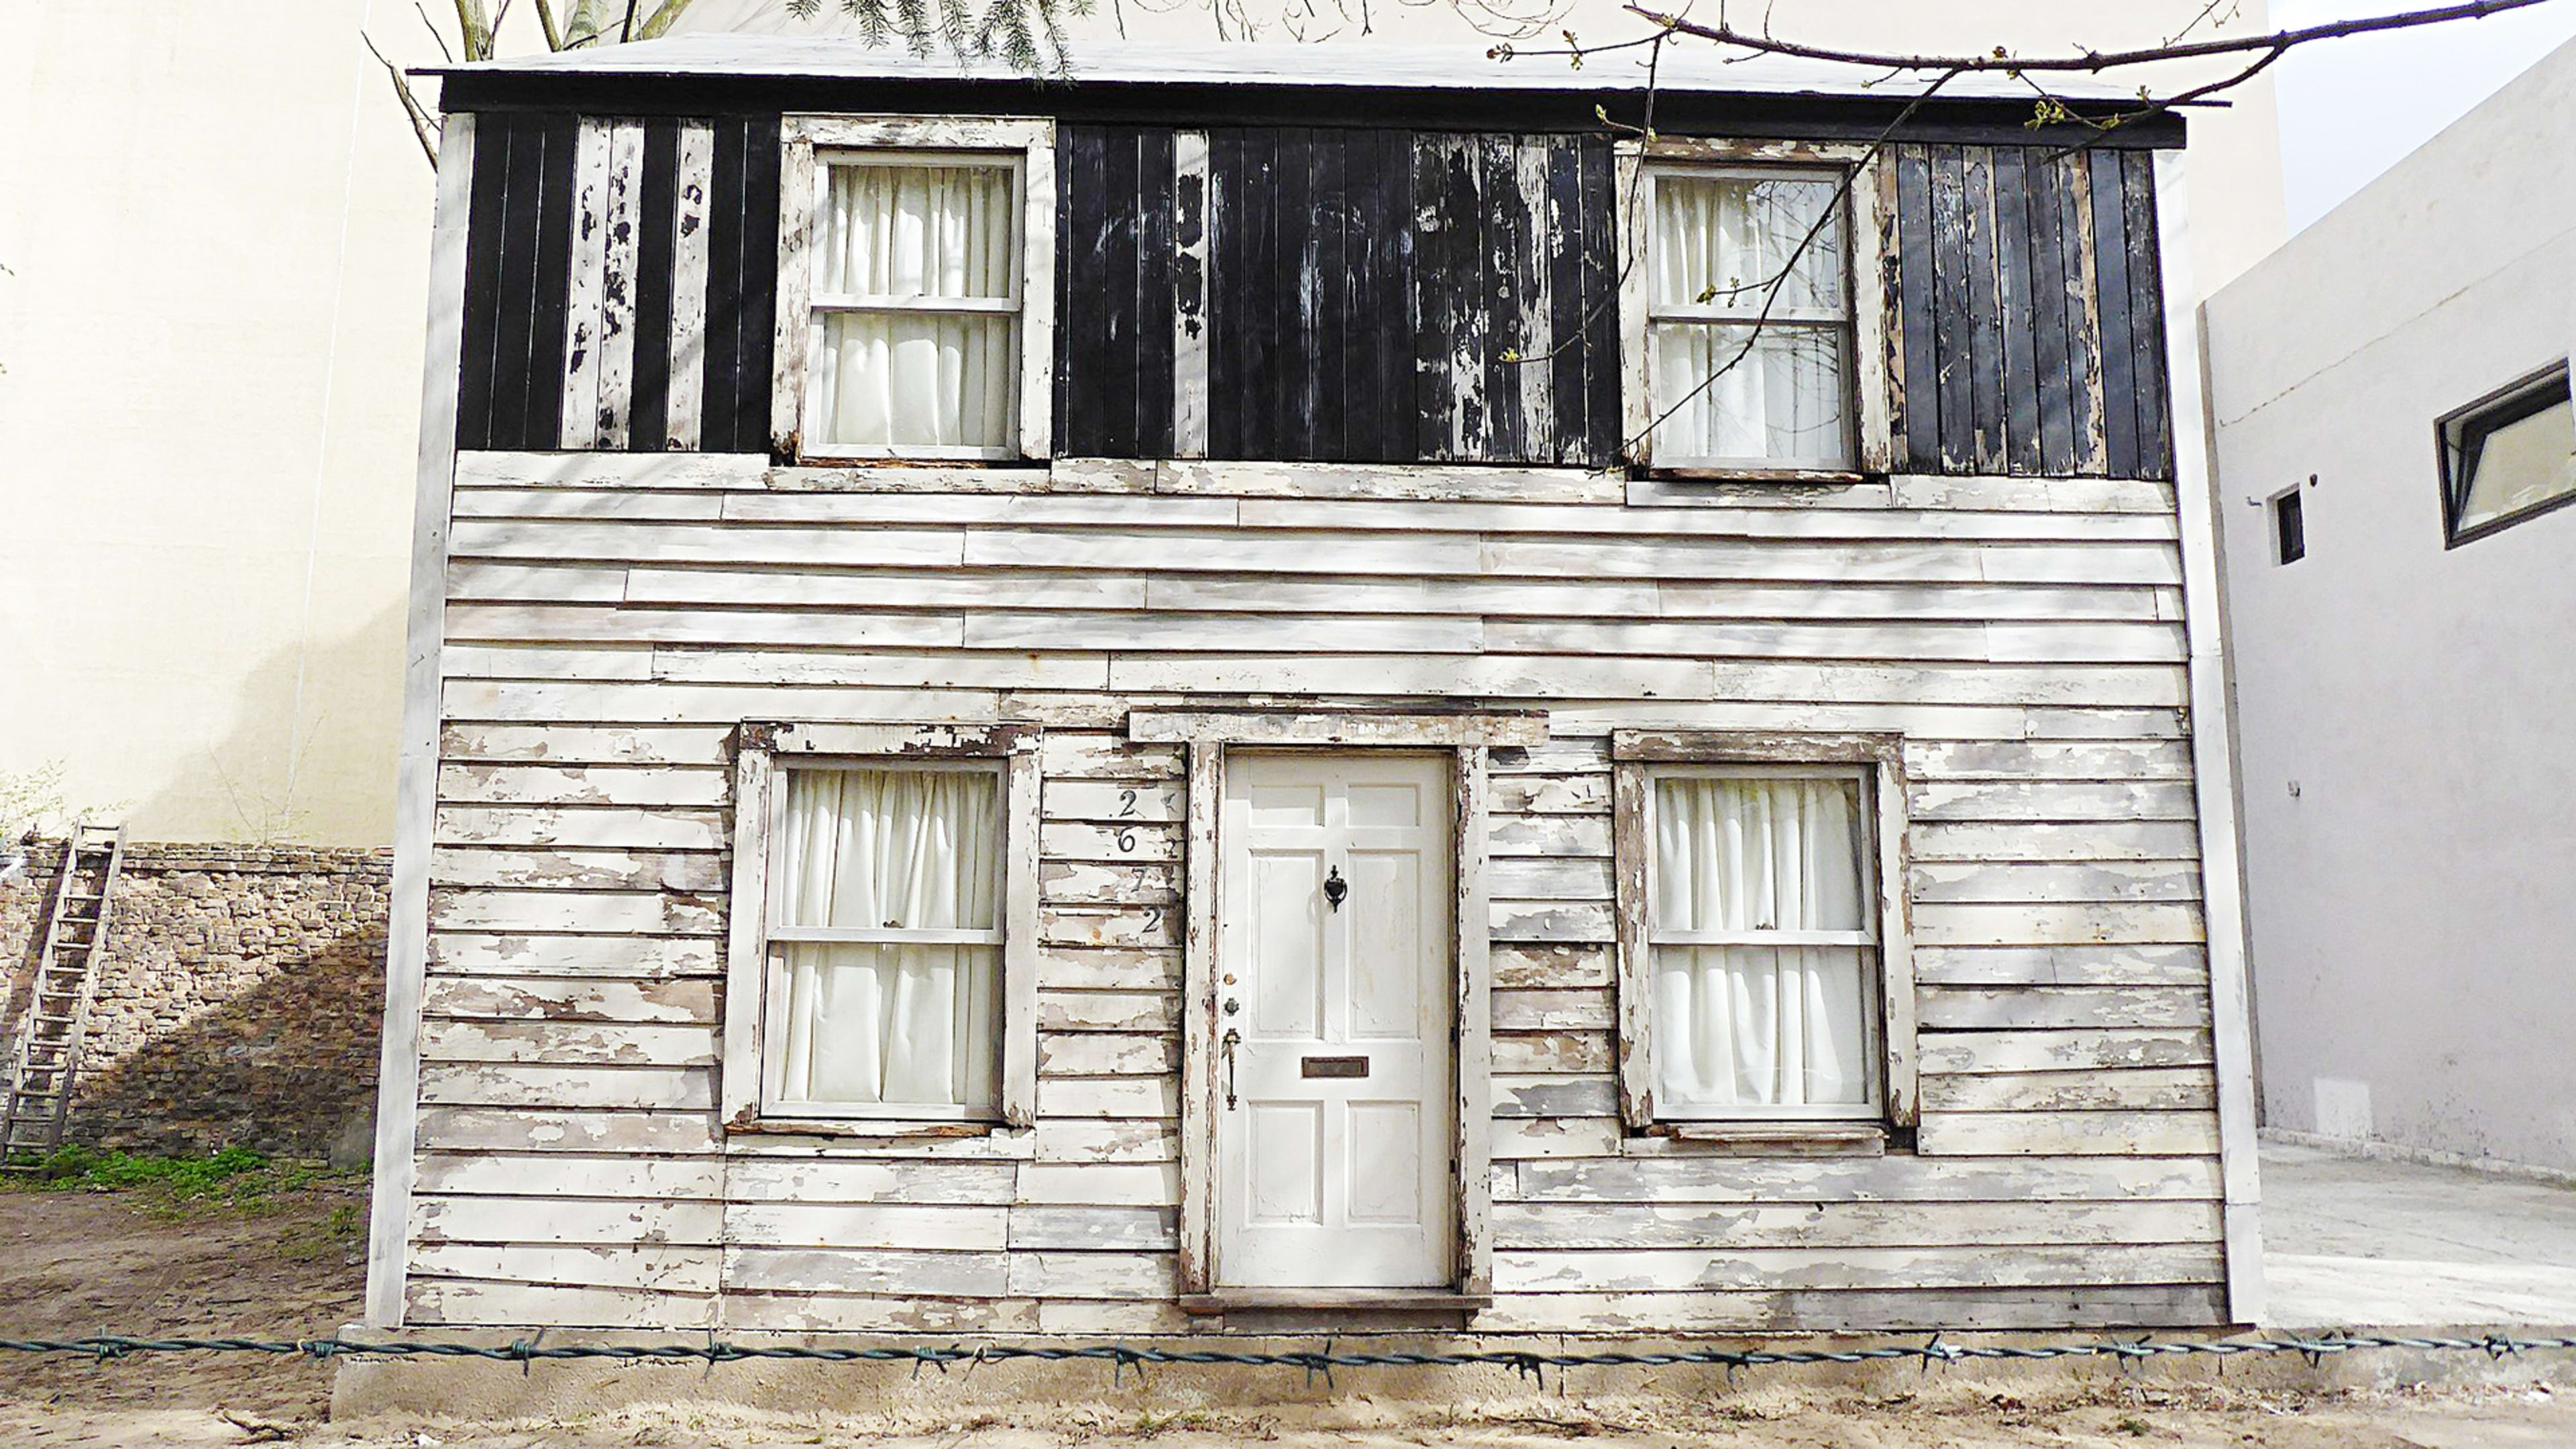 Rosa Parks’s house has been on a long, beautiful journey